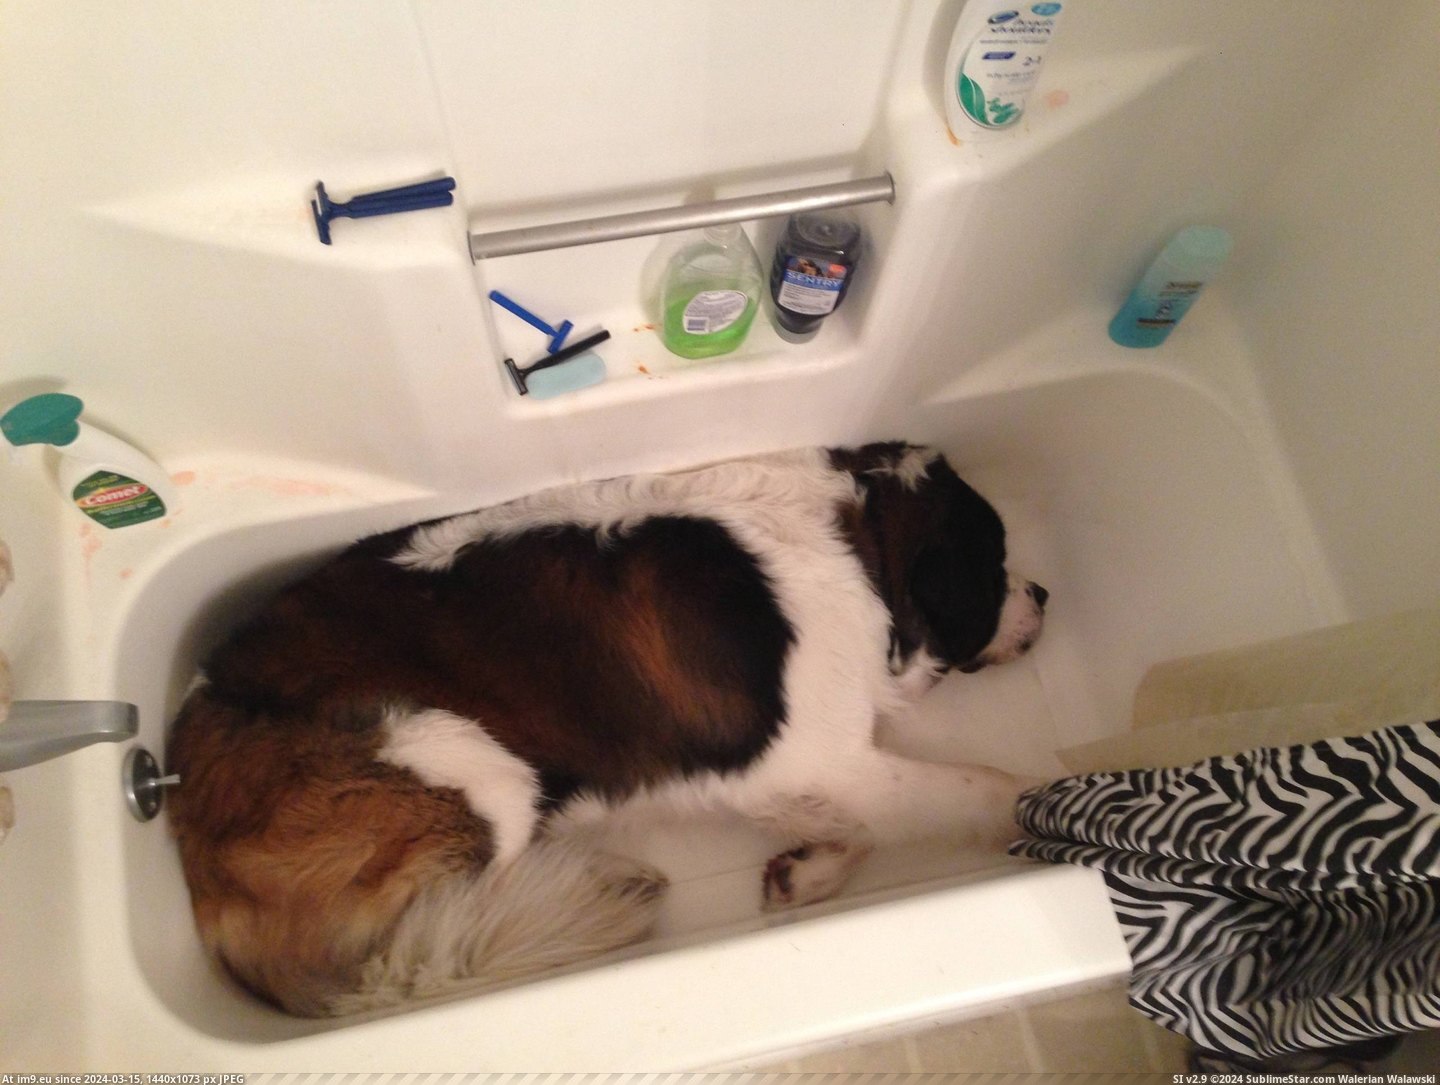 #Funny #Had #Him #Counter #Habit #Jub #Weirdo #Caught #Laying #Realize [Funny] After I caught him on the counter, I started to realize Jub Jub has always had a habit of laying down like a weirdo. 8 Pic. (Obraz z album My r/FUNNY favs))